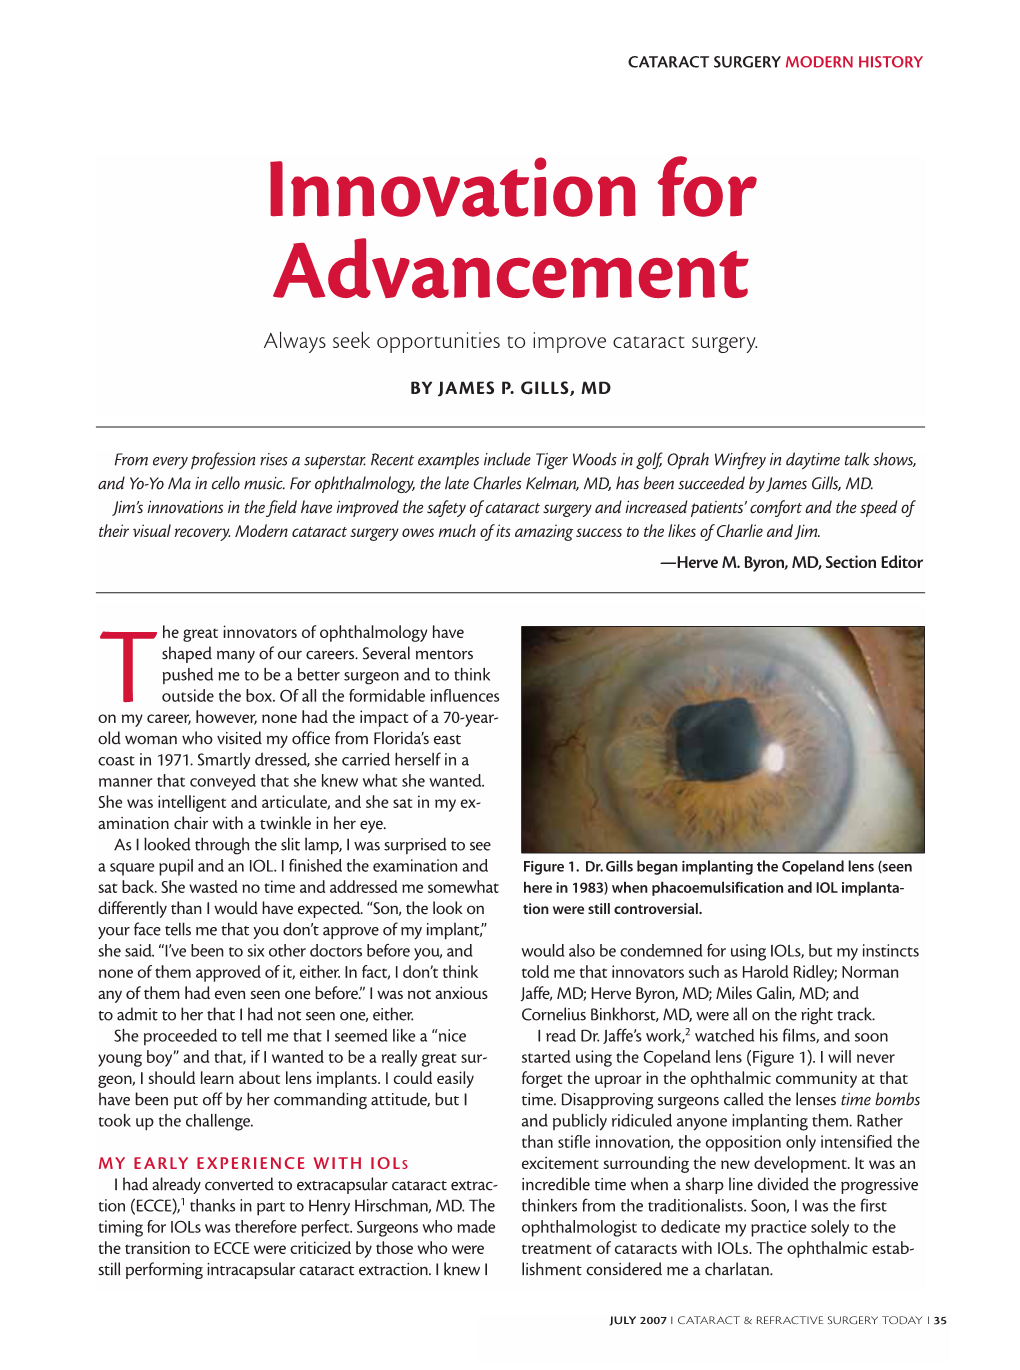 Innovation for Advancement Always Seek Opportunities to Improve Cataract Surgery